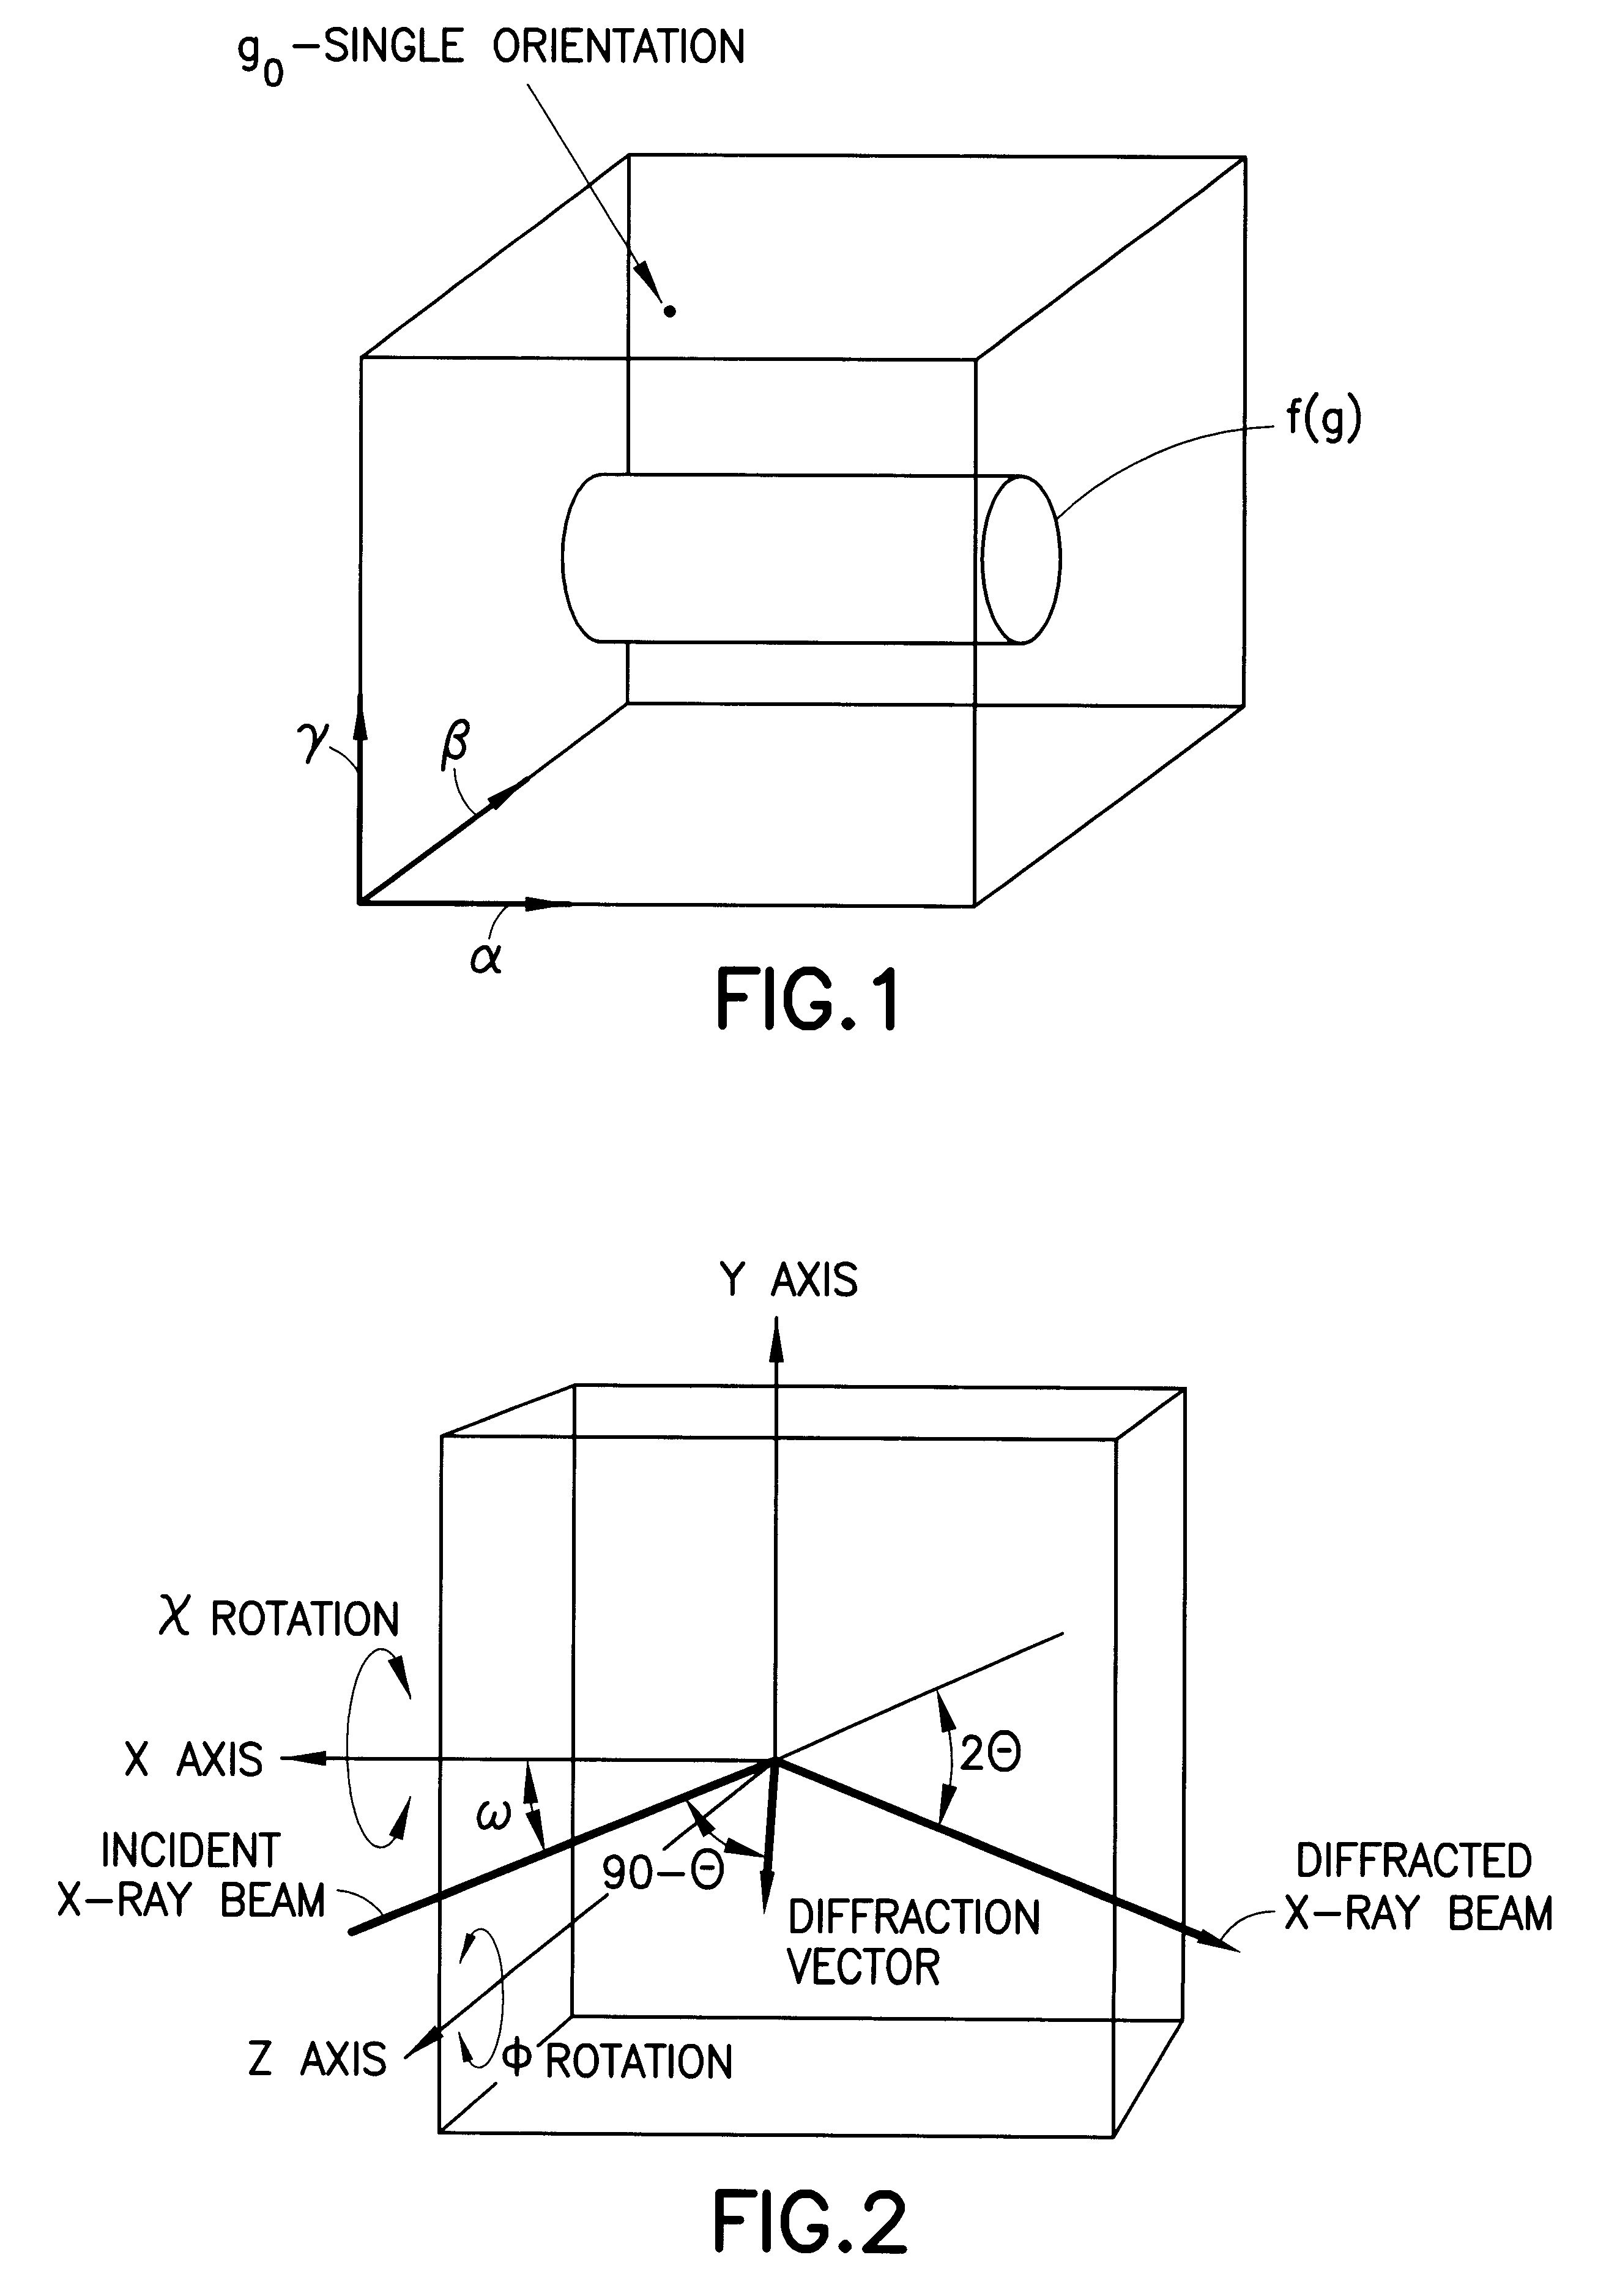 Apparatus and method for texture analysis on semiconductor wafers